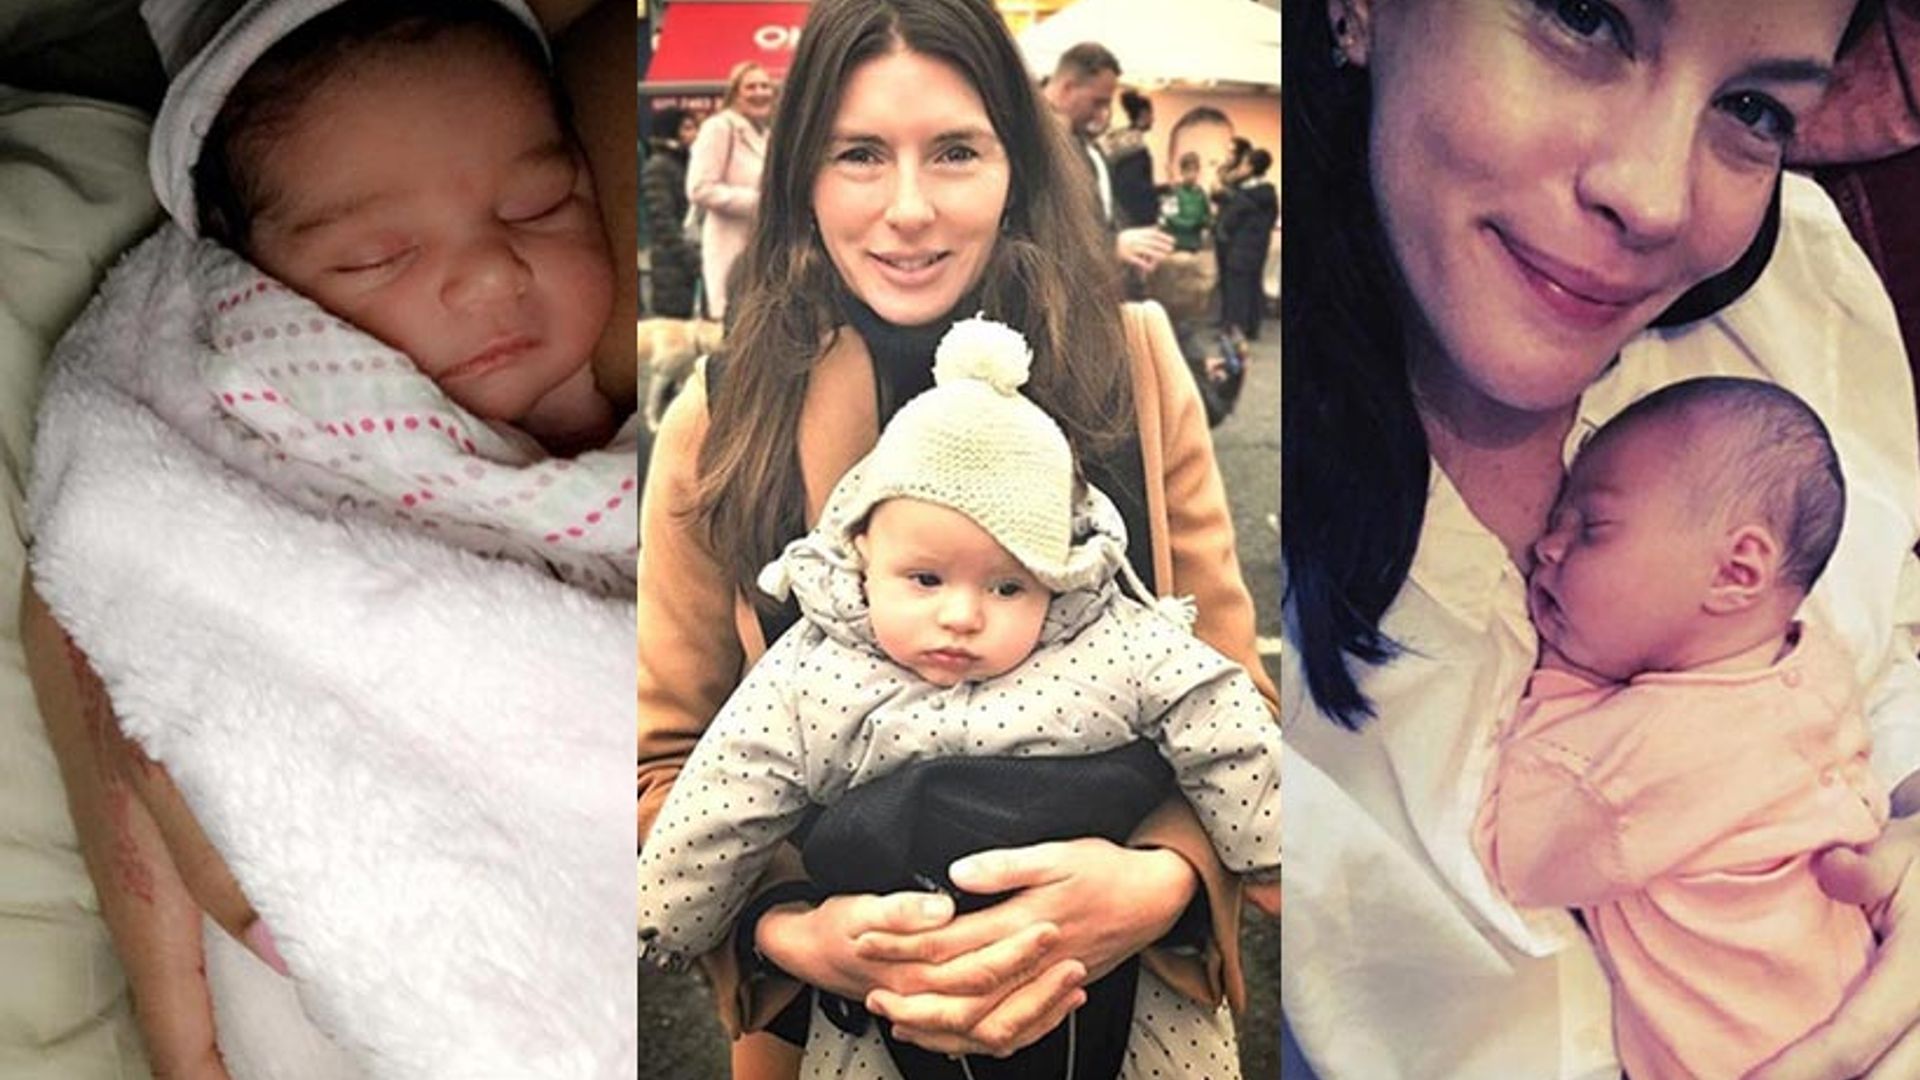 The sweetest new arrivals - celebrity babies born in 2016